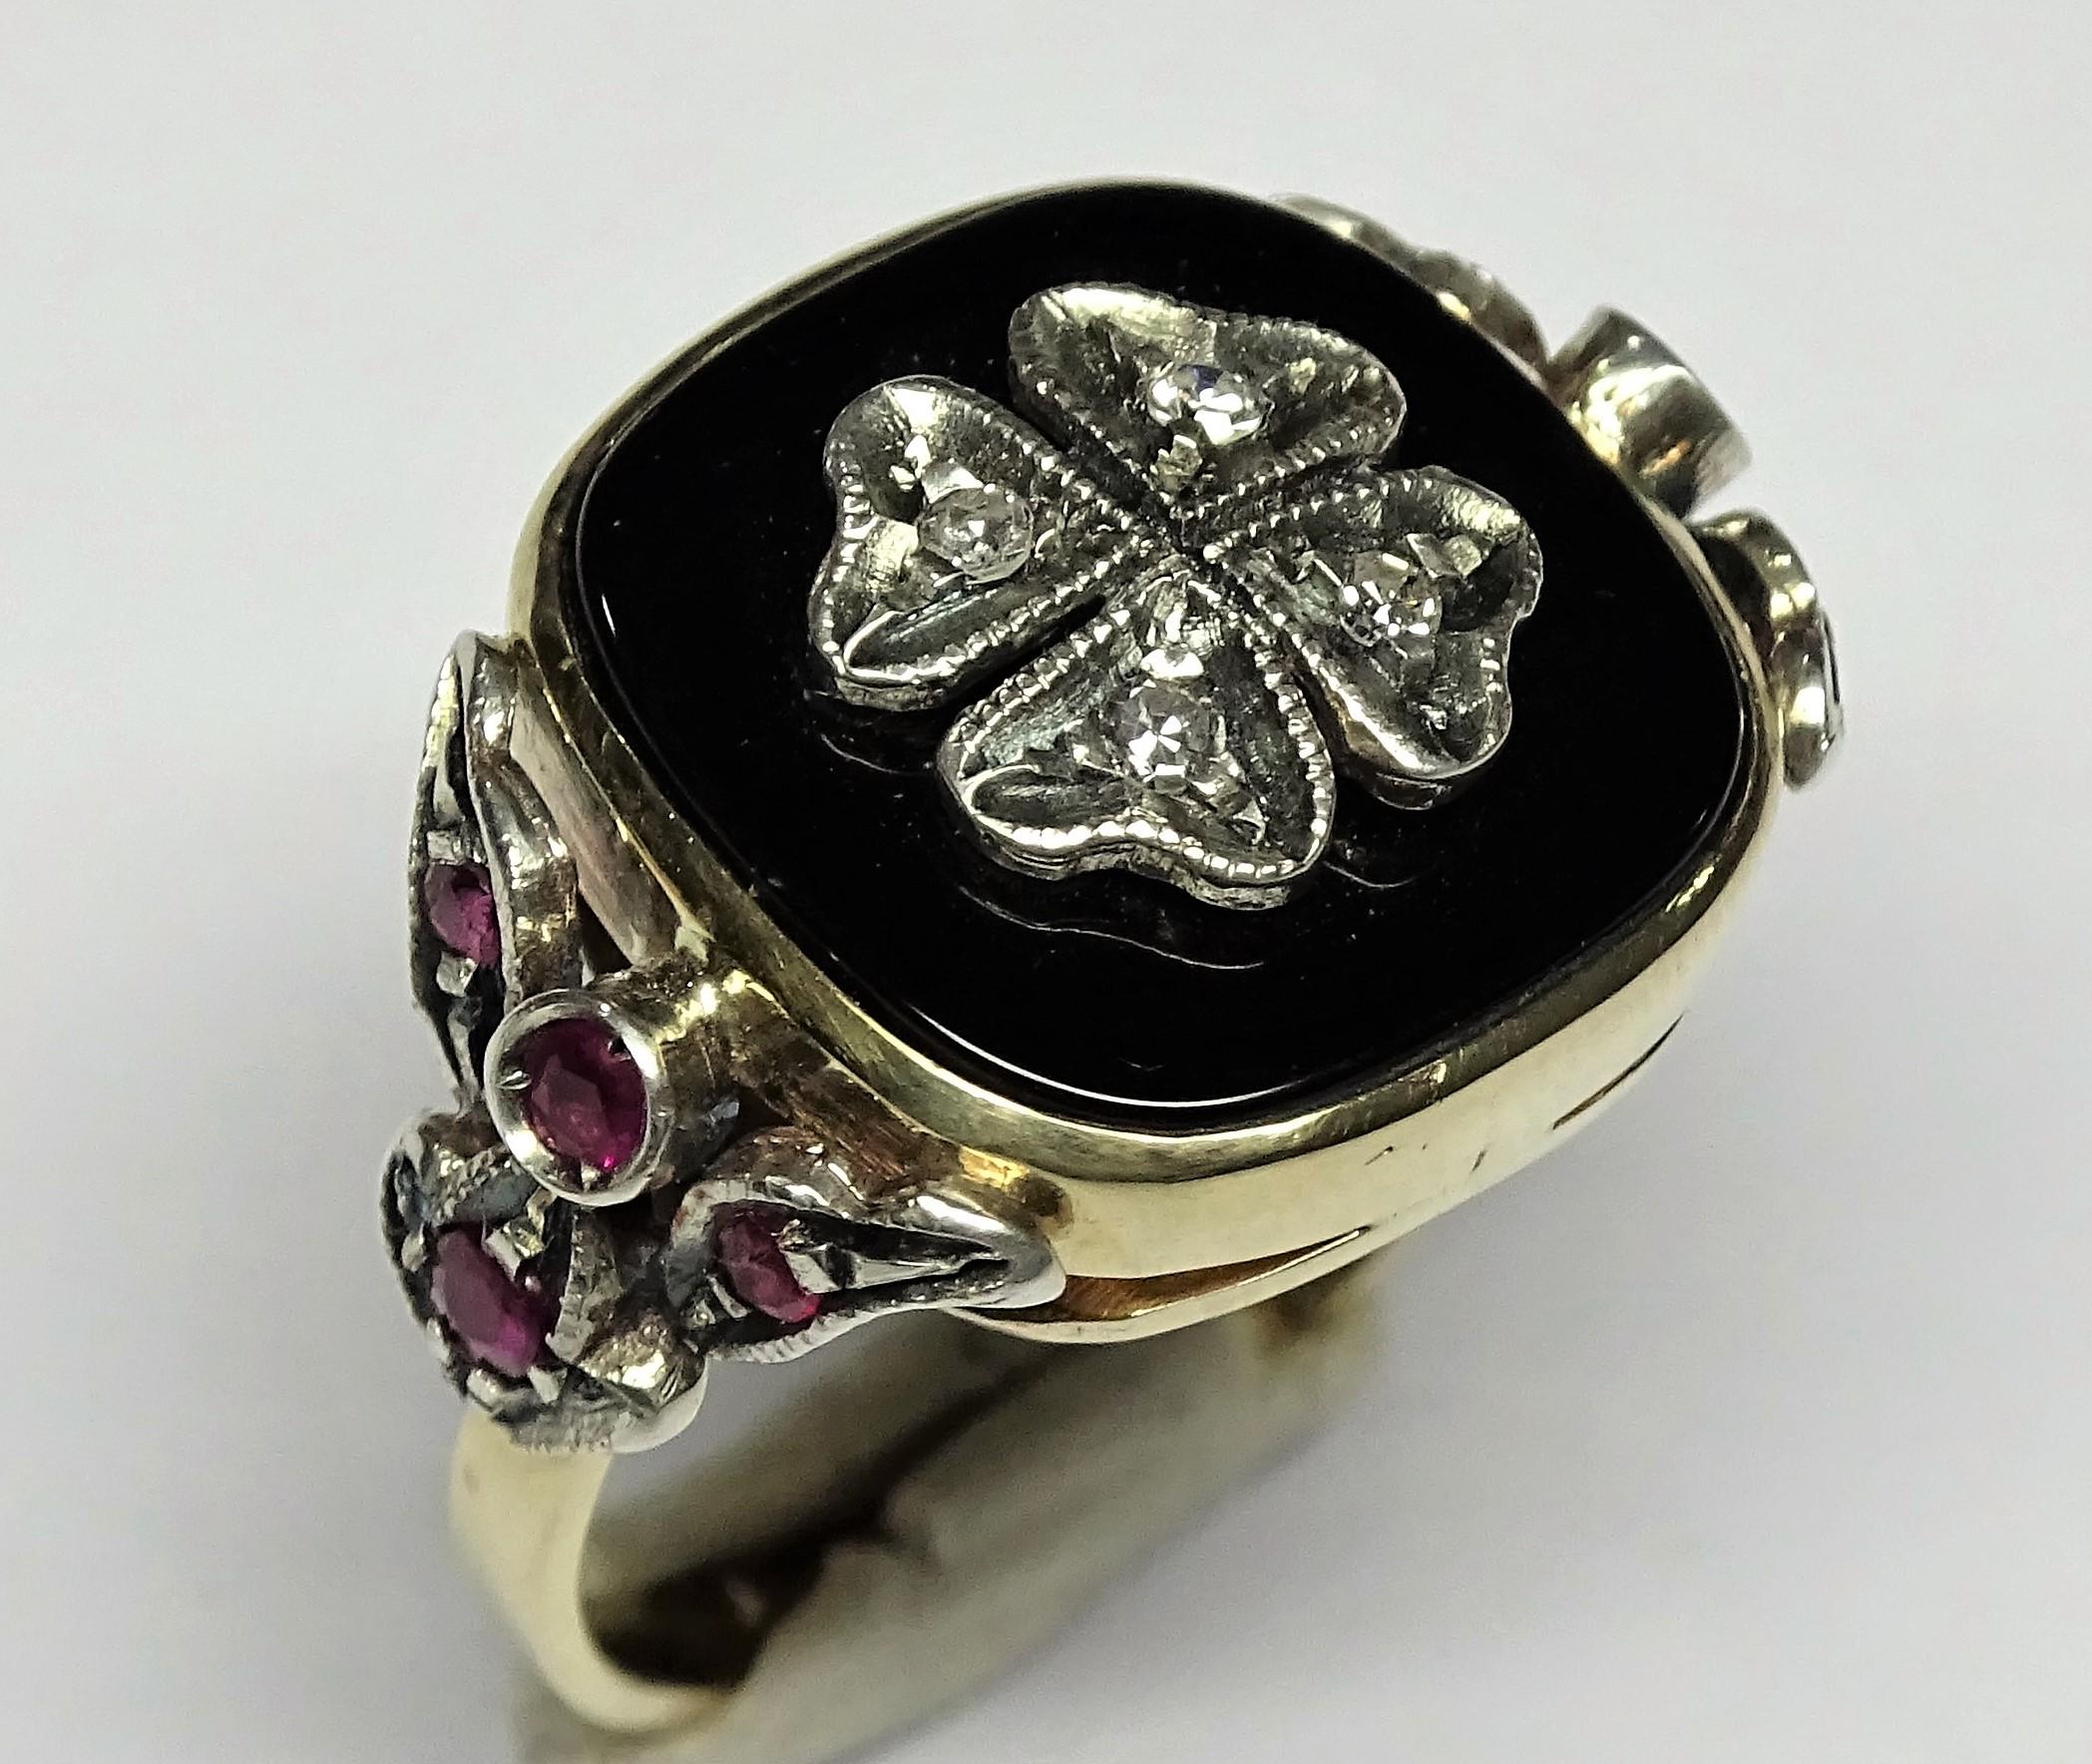 This Ring is made of 14K Yellow Gold and Sterling Silver.
This Ring has 0.07 Carats of Round Cut White Diamonds.
This Ring has 0.32 Carats of Rubies and an Onyx.
This Ring is inspired by Art Nouveau.
Size ITA: 16.5 - Size USA: 8
We're a workshop so